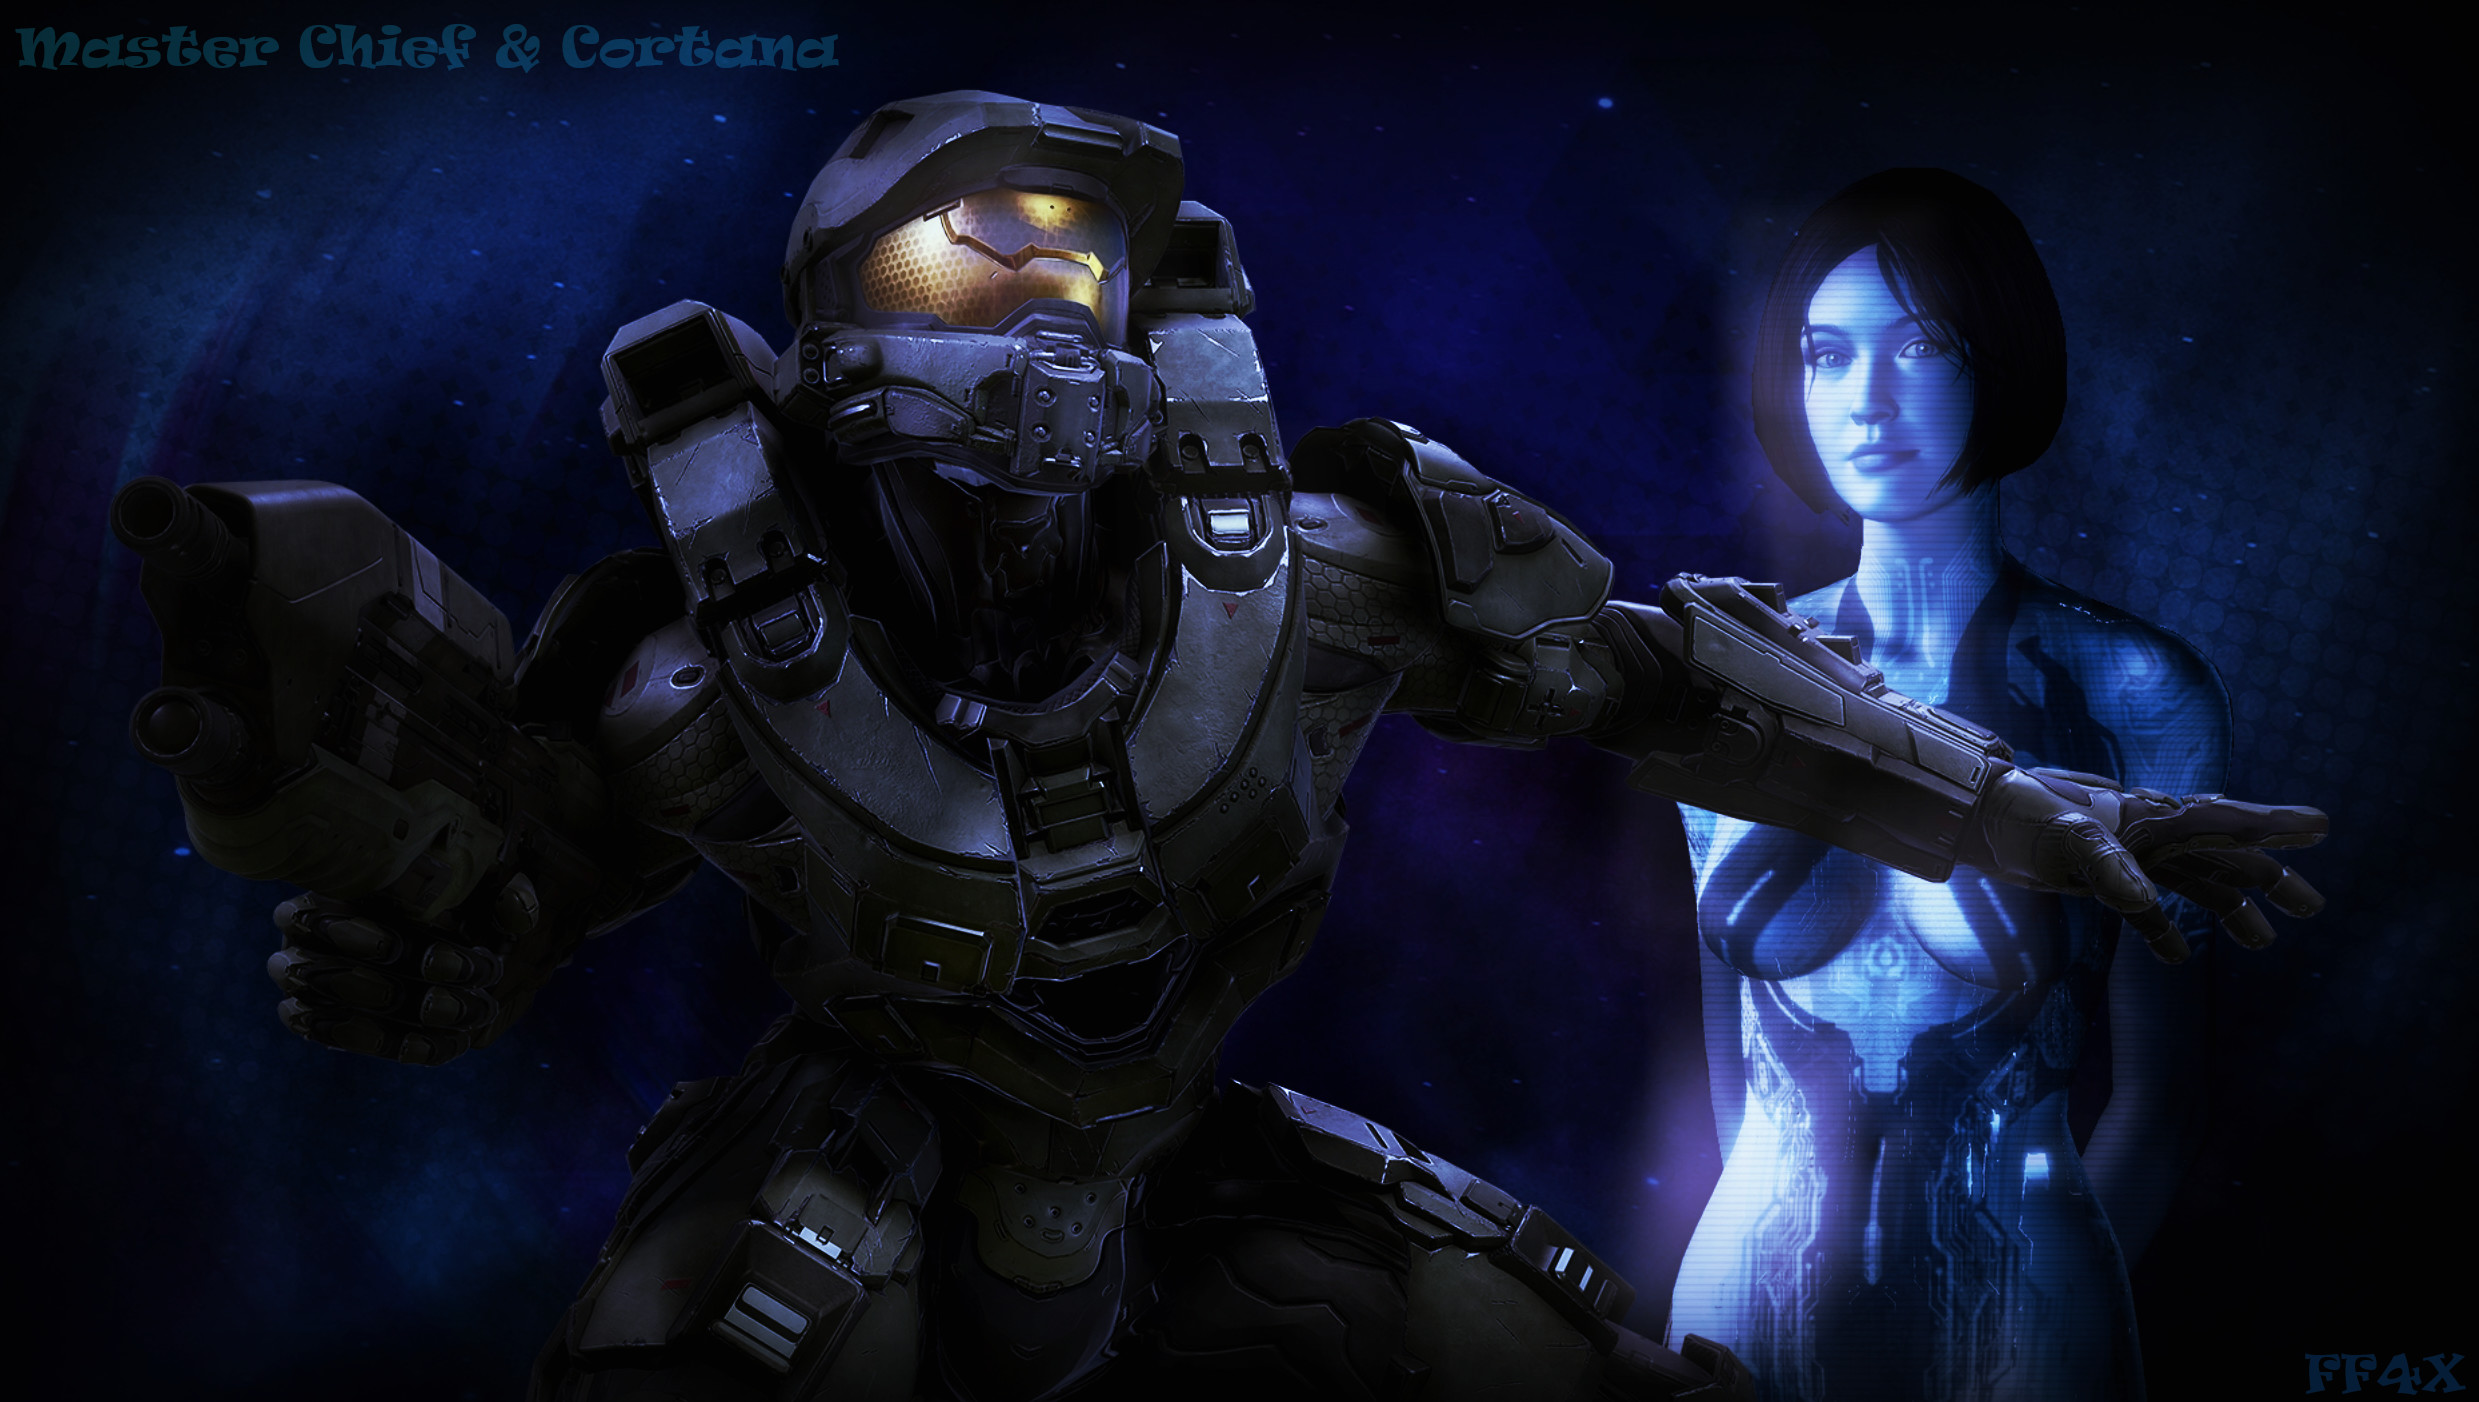 2479x1402 ... Halo 4 Cortana and Master Chief wallpaper by FireFox4X